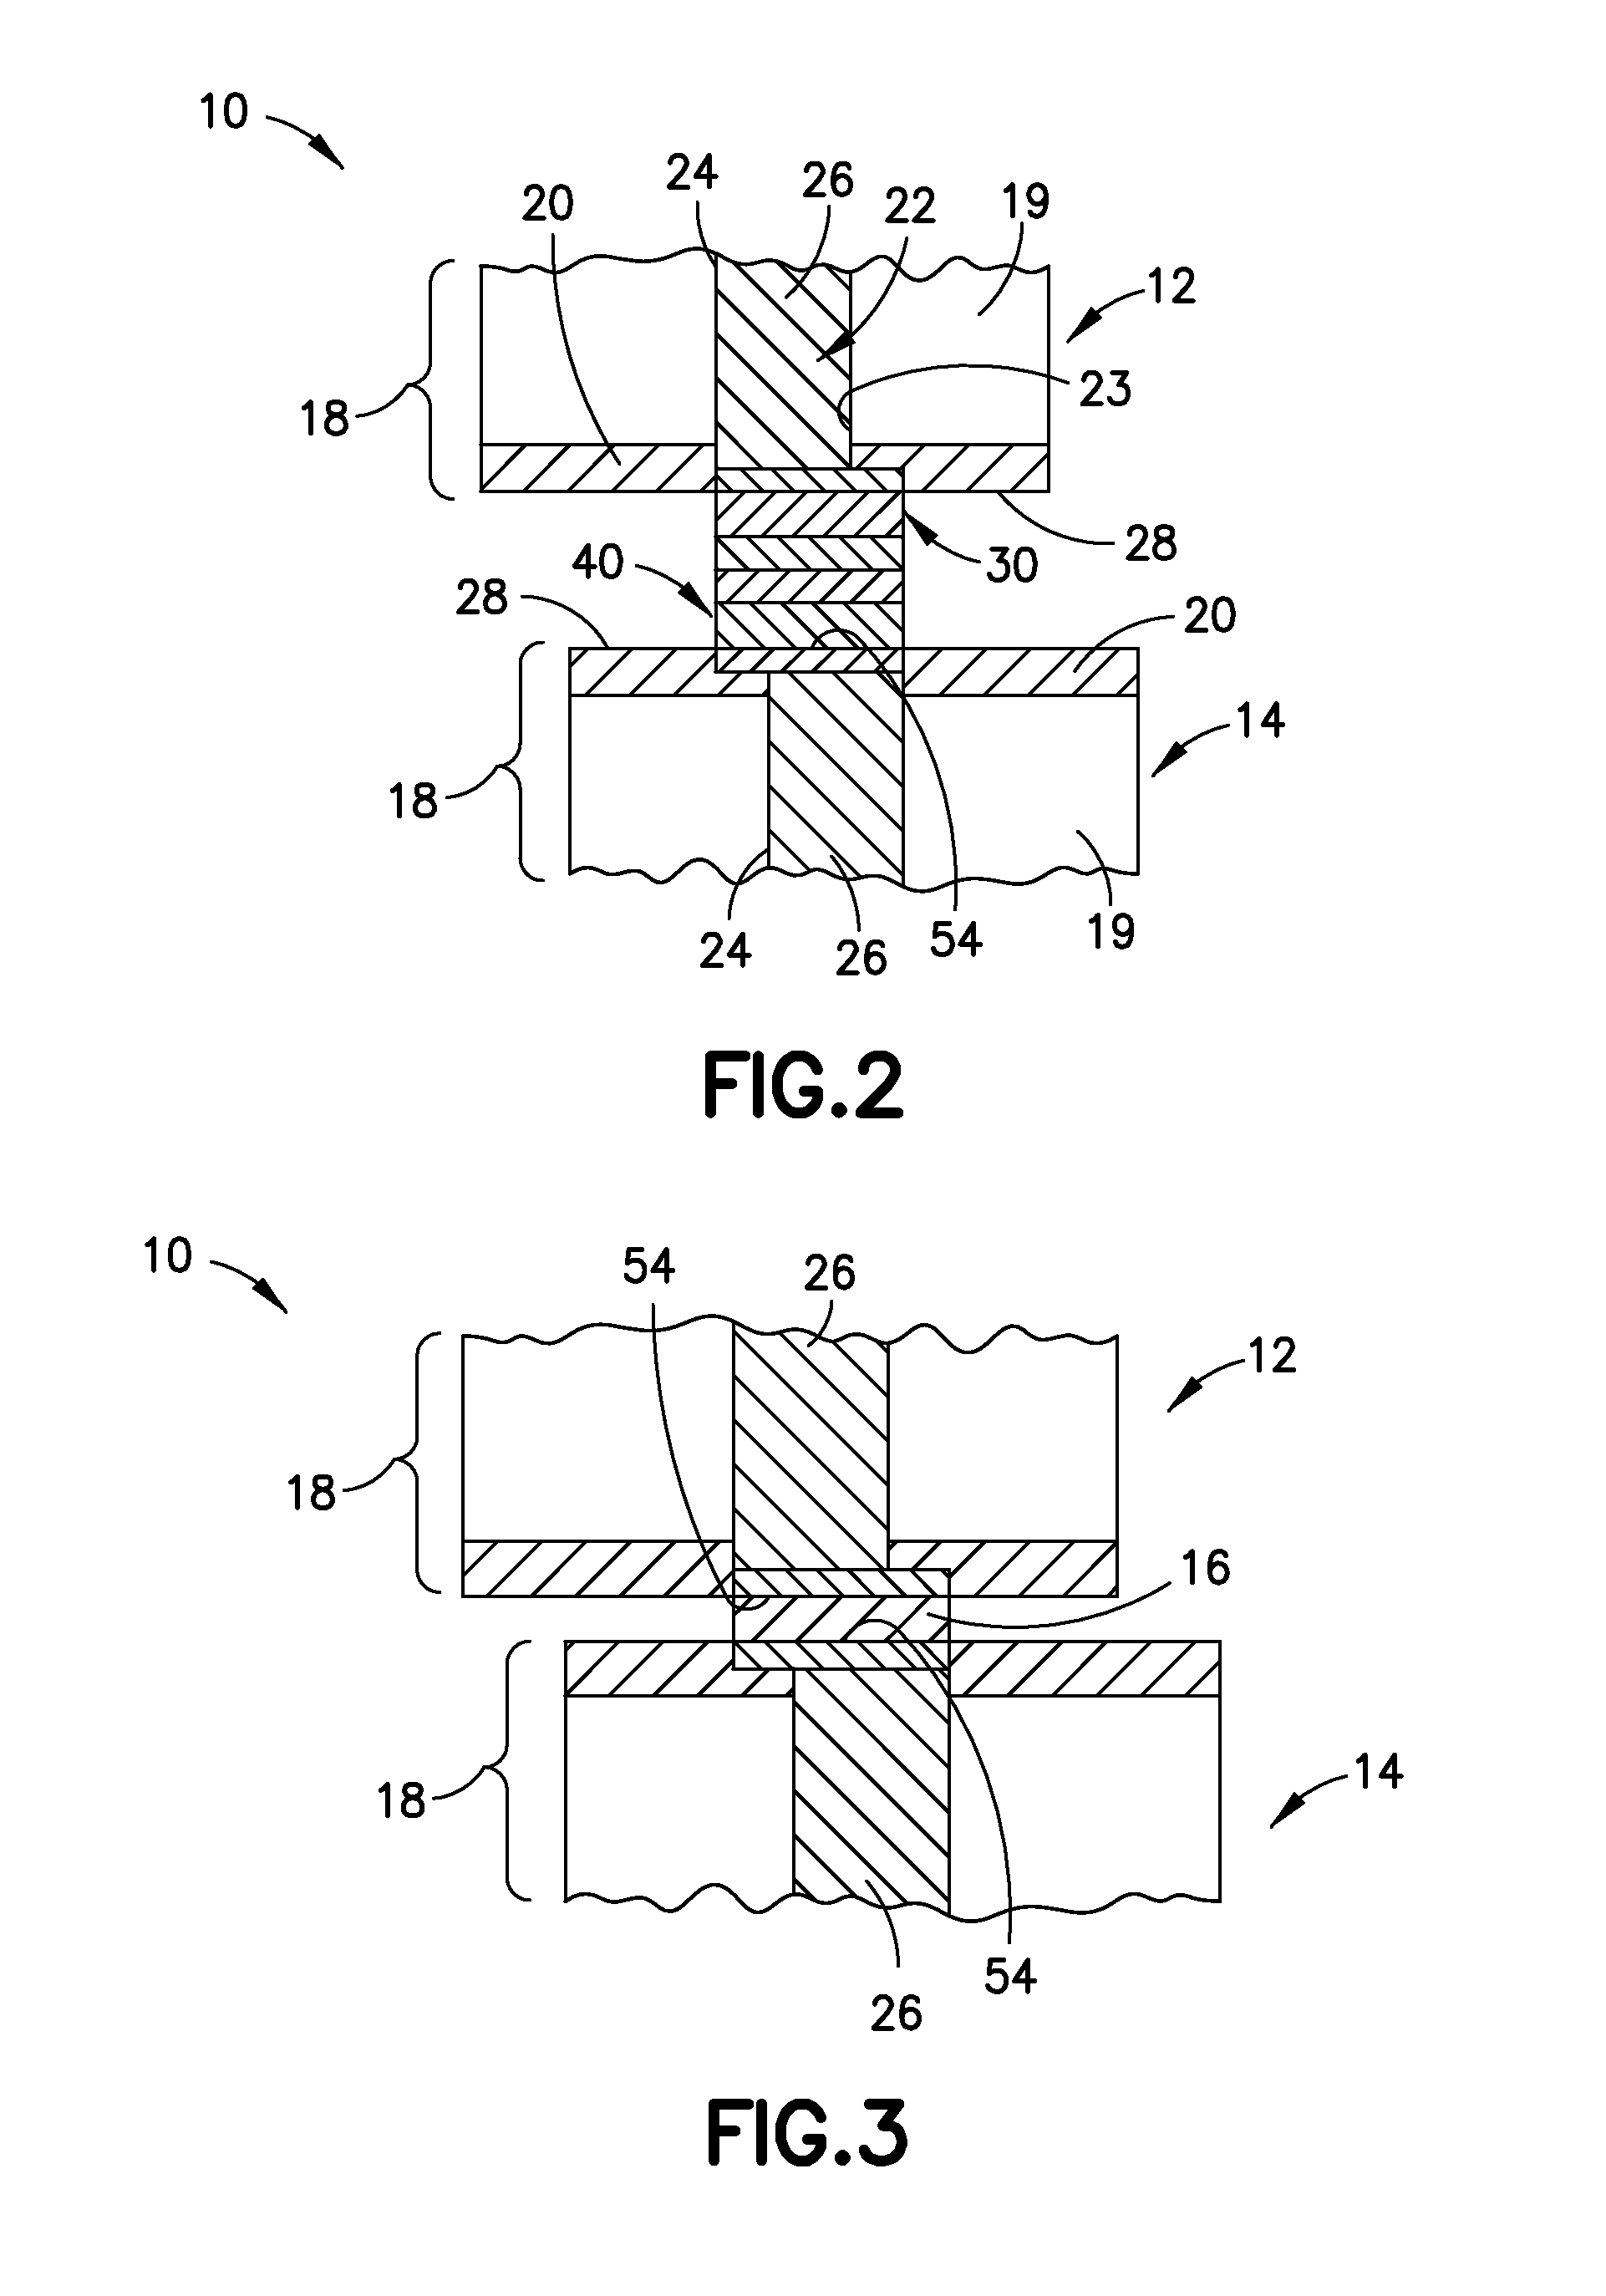 Advanced device assembly structures and methods